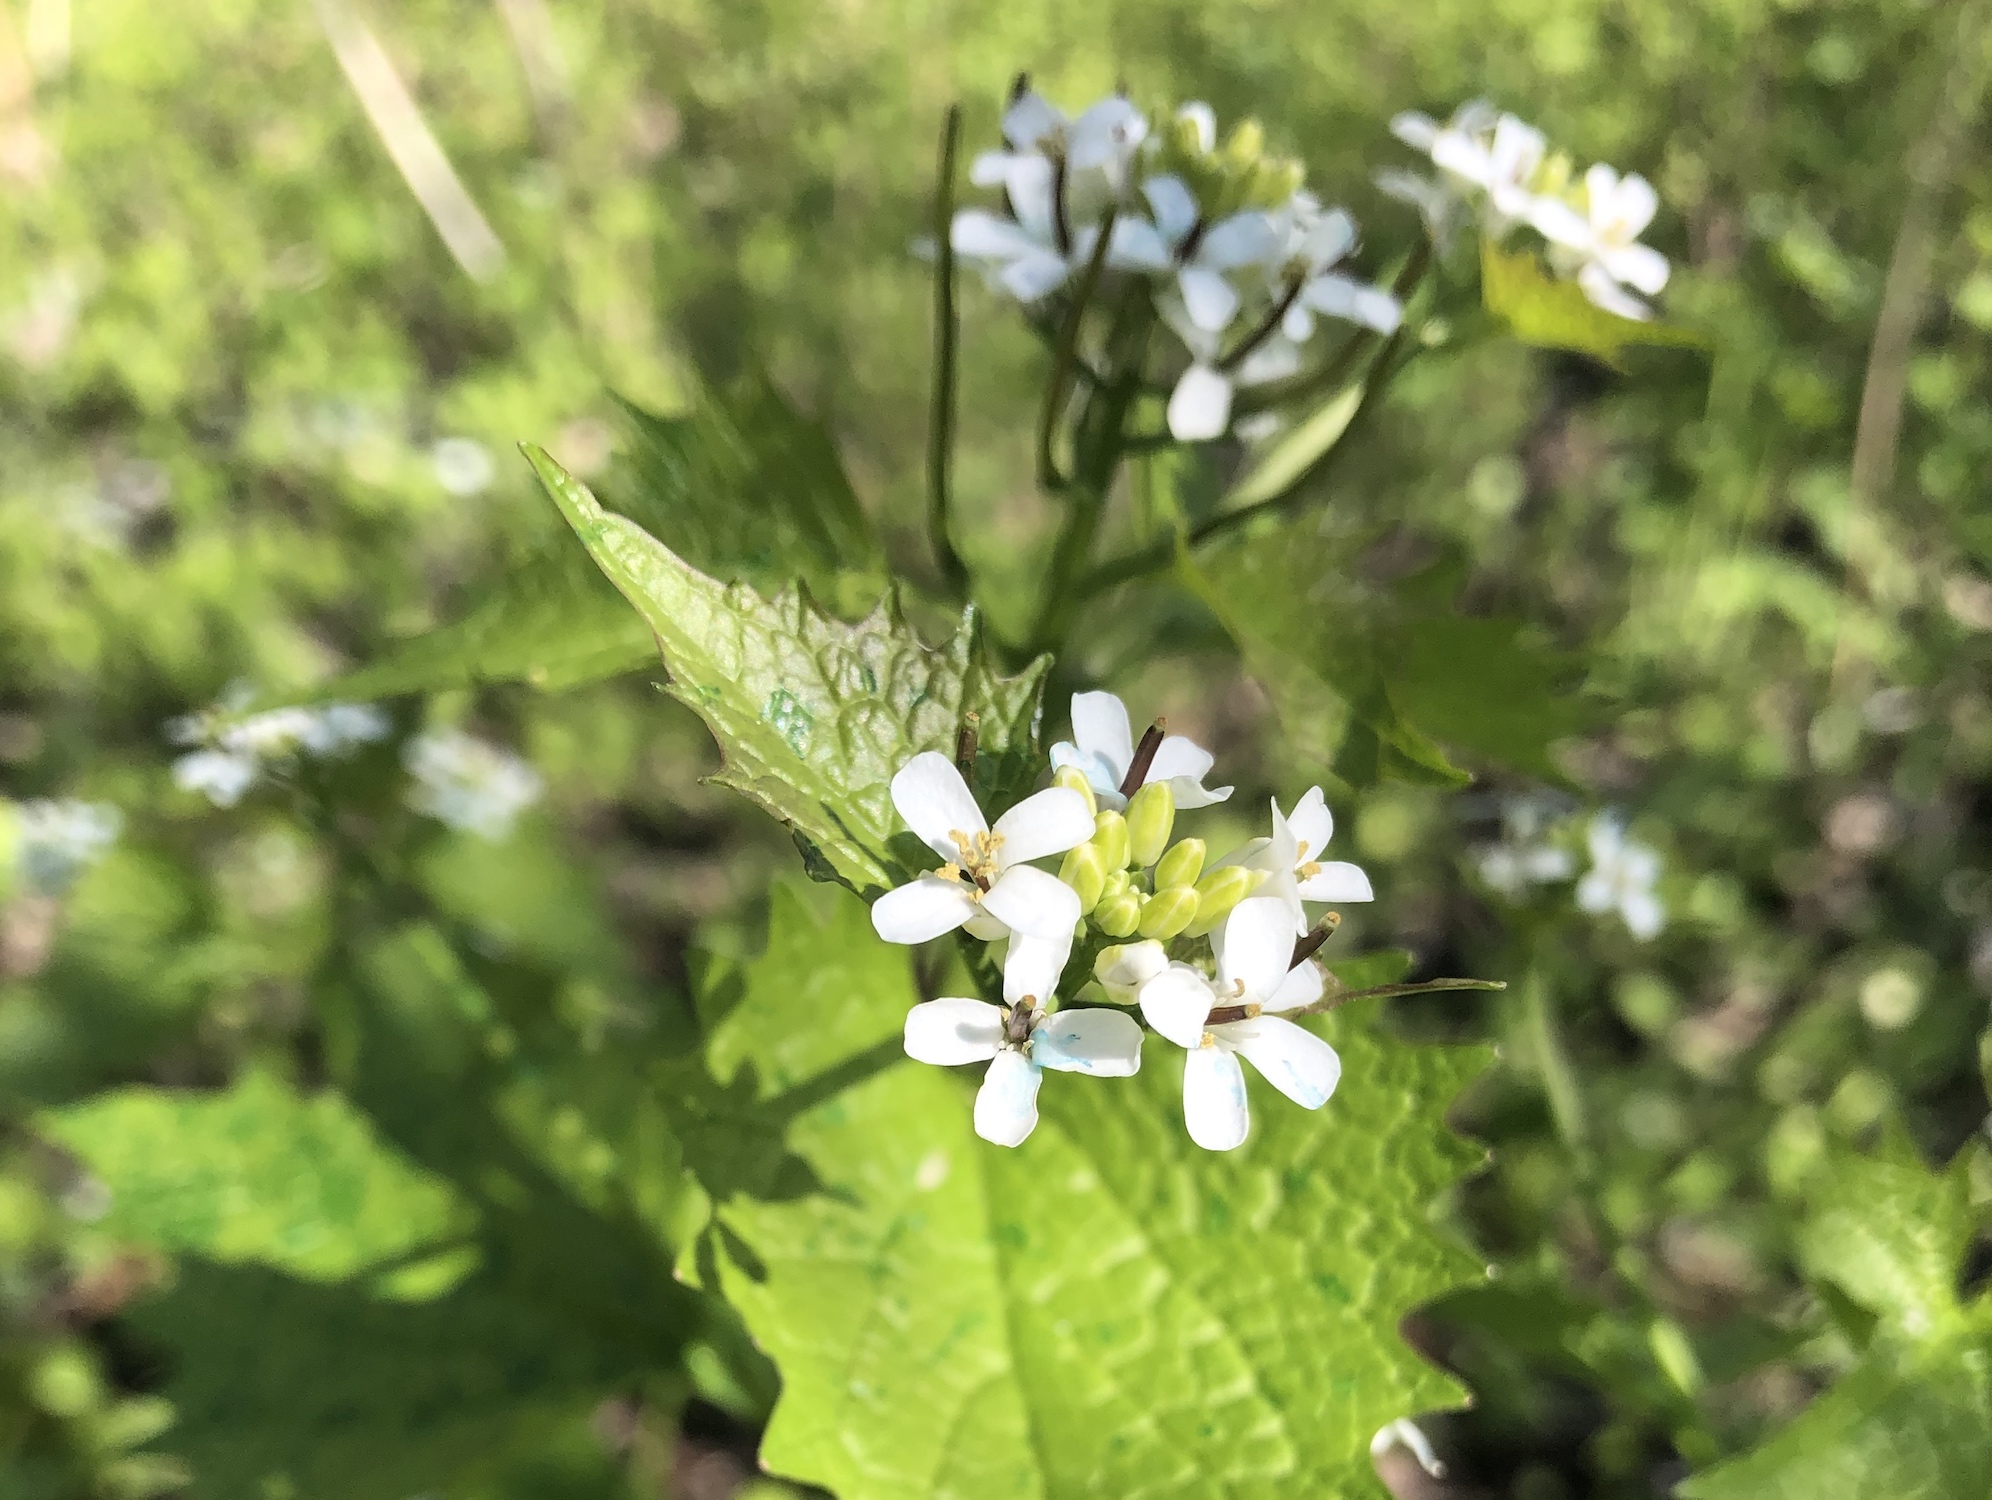 Garlic Mustard by Duck Pond in Madison, Wisconsin on May 12, 2020.